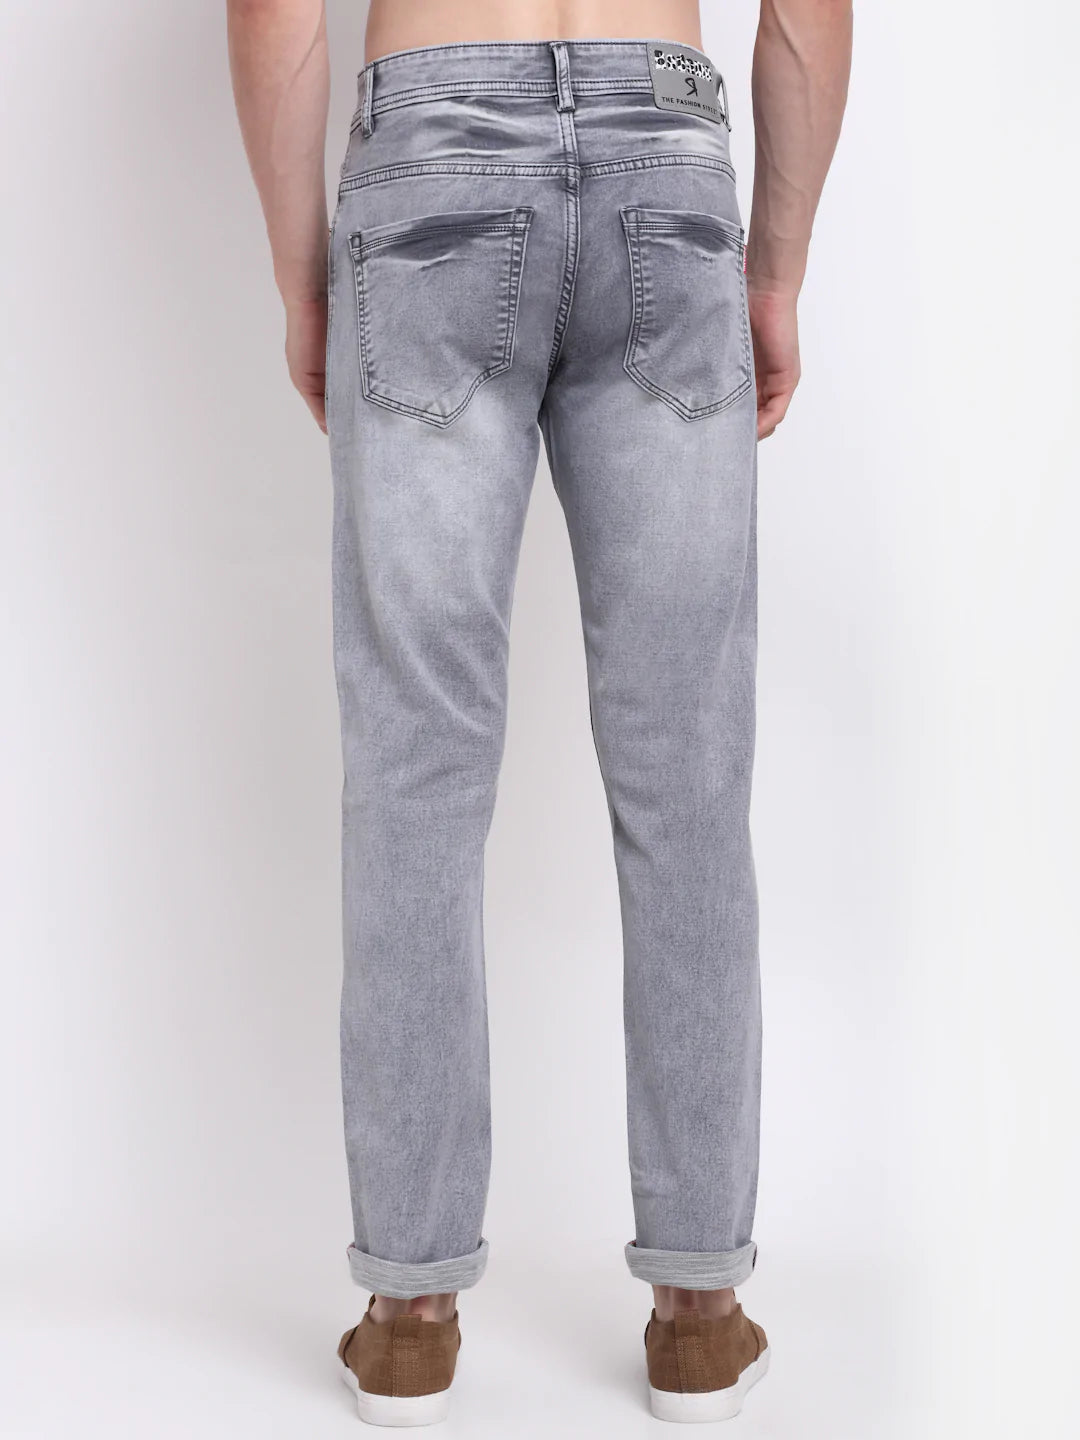 Share 175+ grey colour jeans best